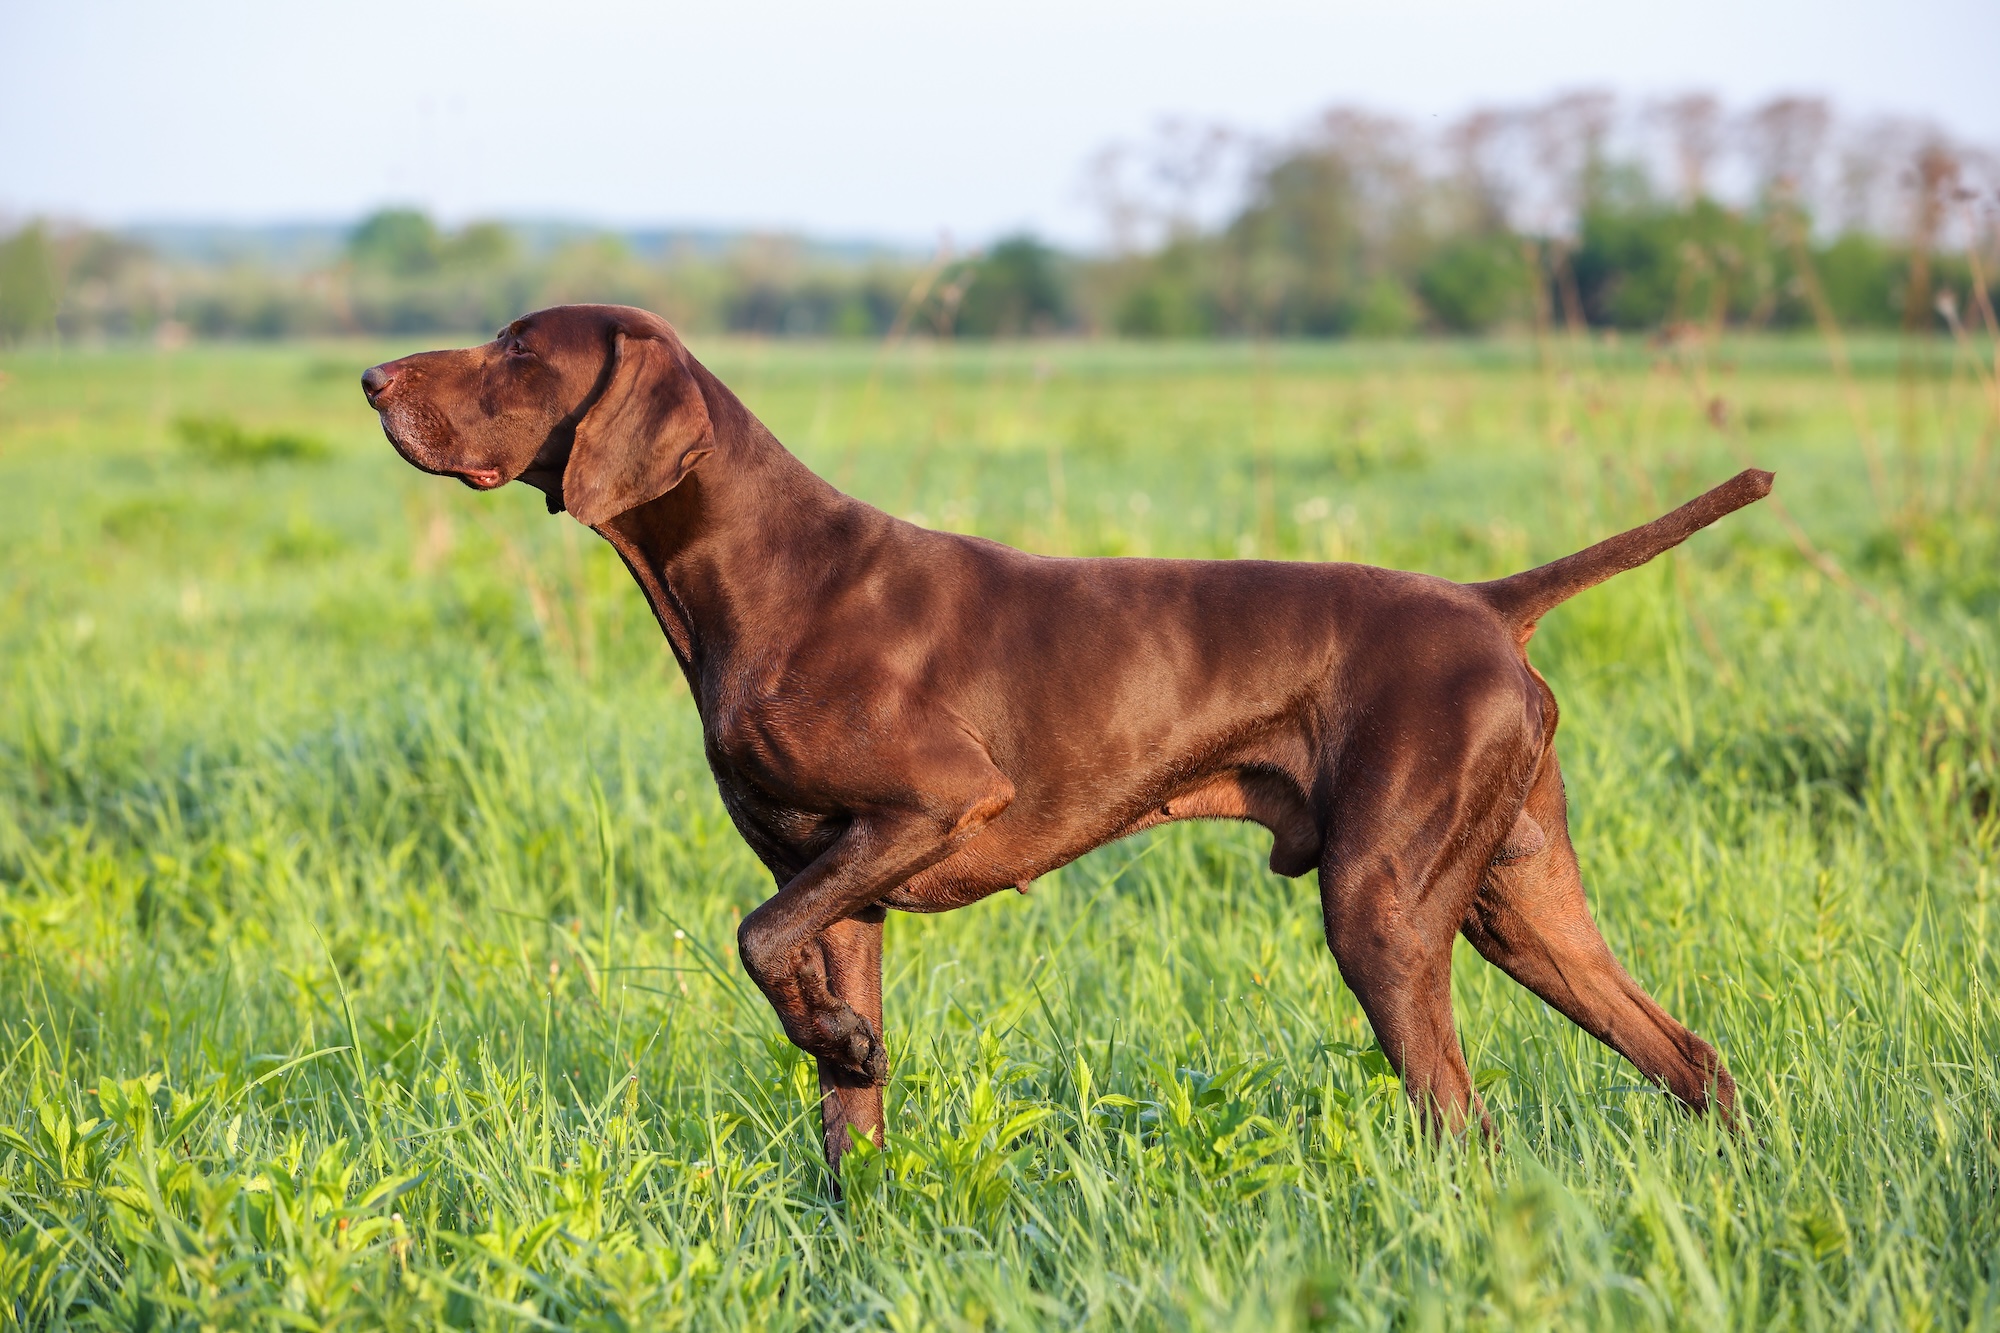 Hunting dogs are often pointing dogs, like this one.